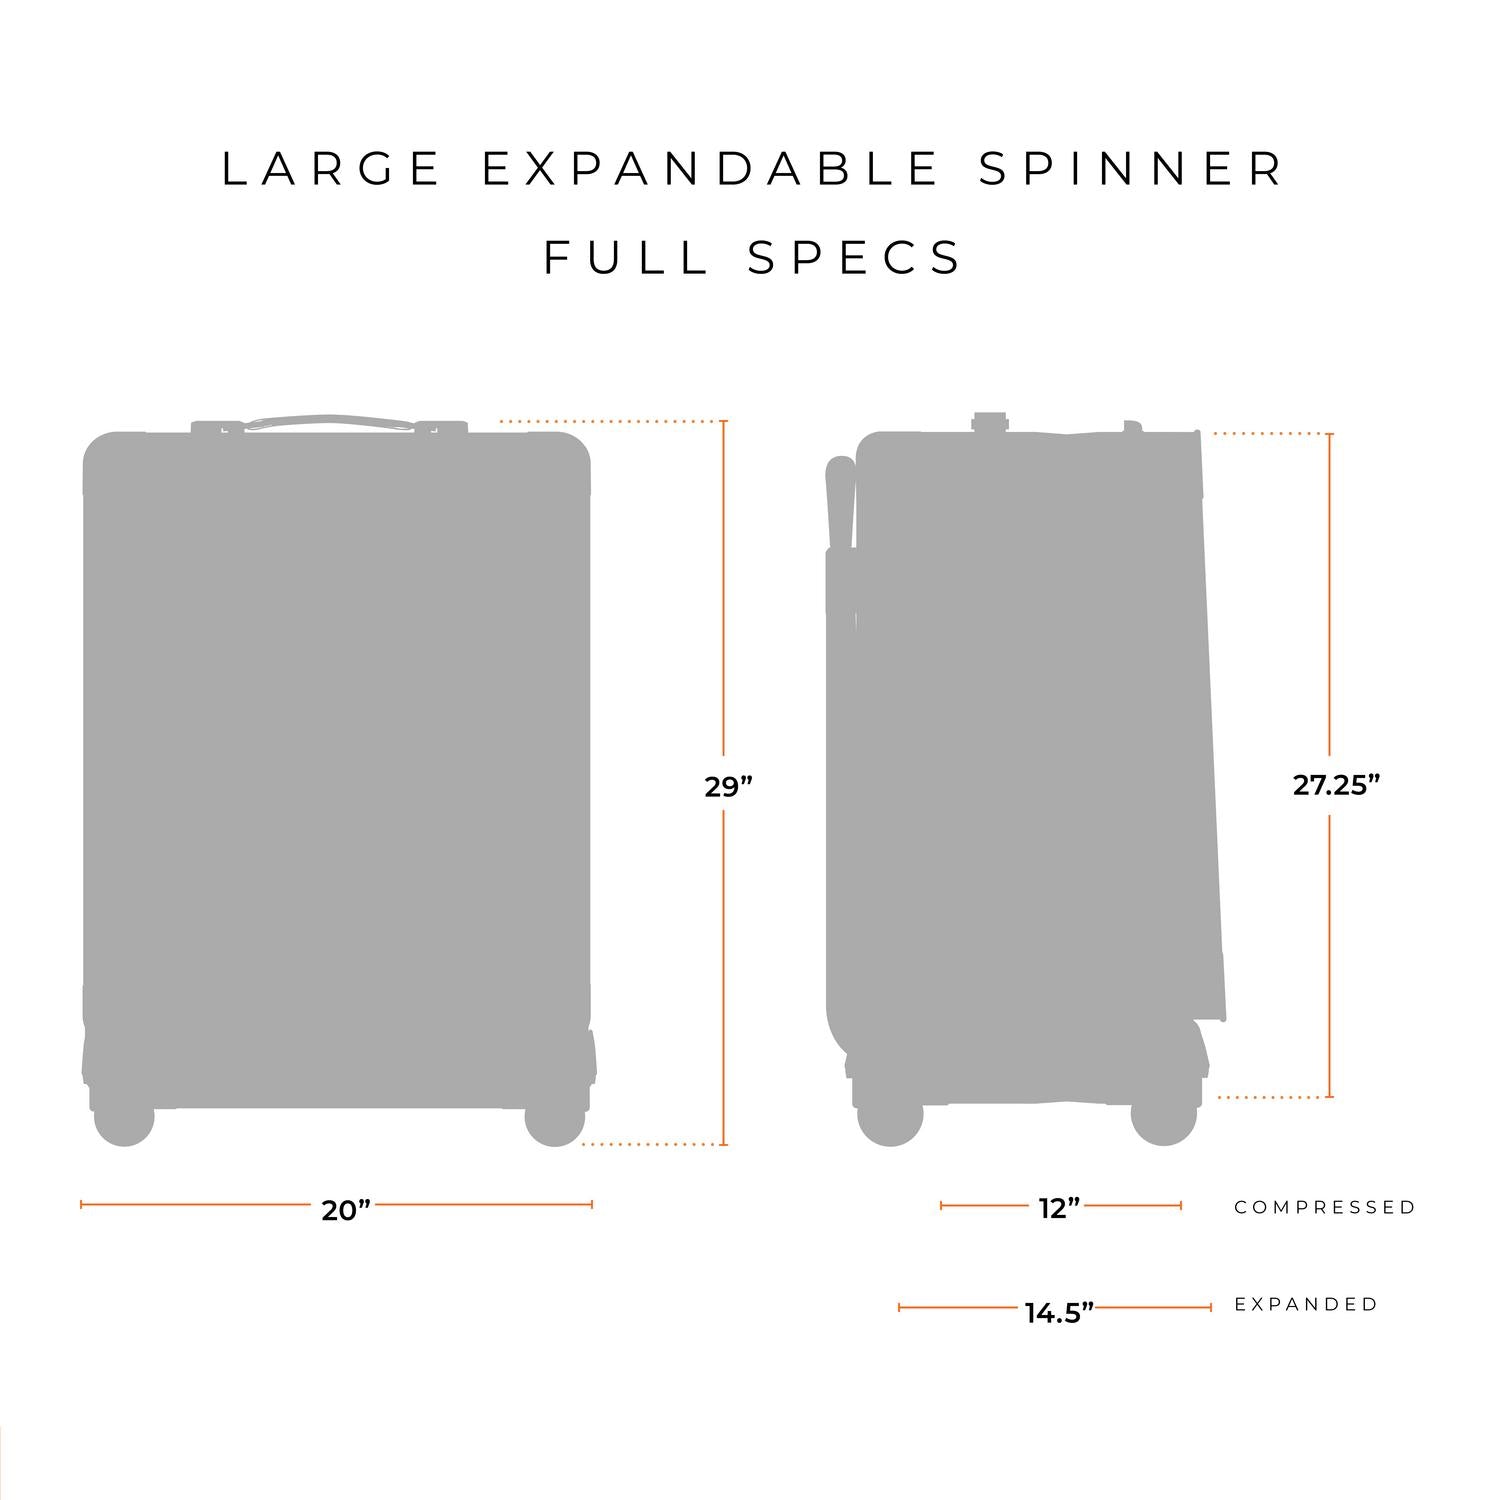 Briggs and Riley Large Expandable Spinner Full Specs 20"x29"12" compressed or 14.5" expanded #color_olive